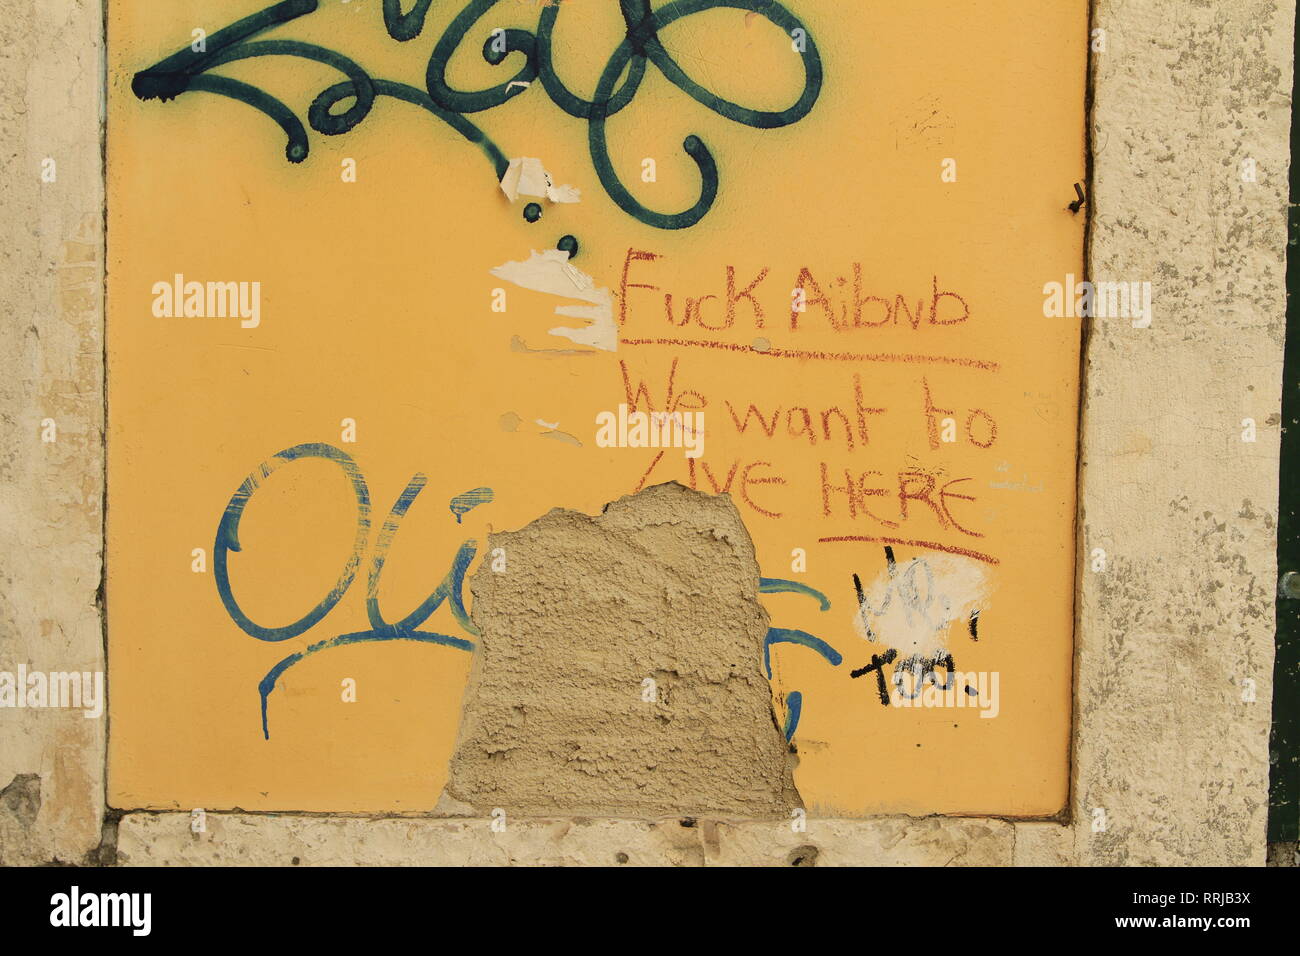 One local's sentiment in the Alfama District in regards to AirBnB and being displaced, Lisbon, Portugal Stock Photo